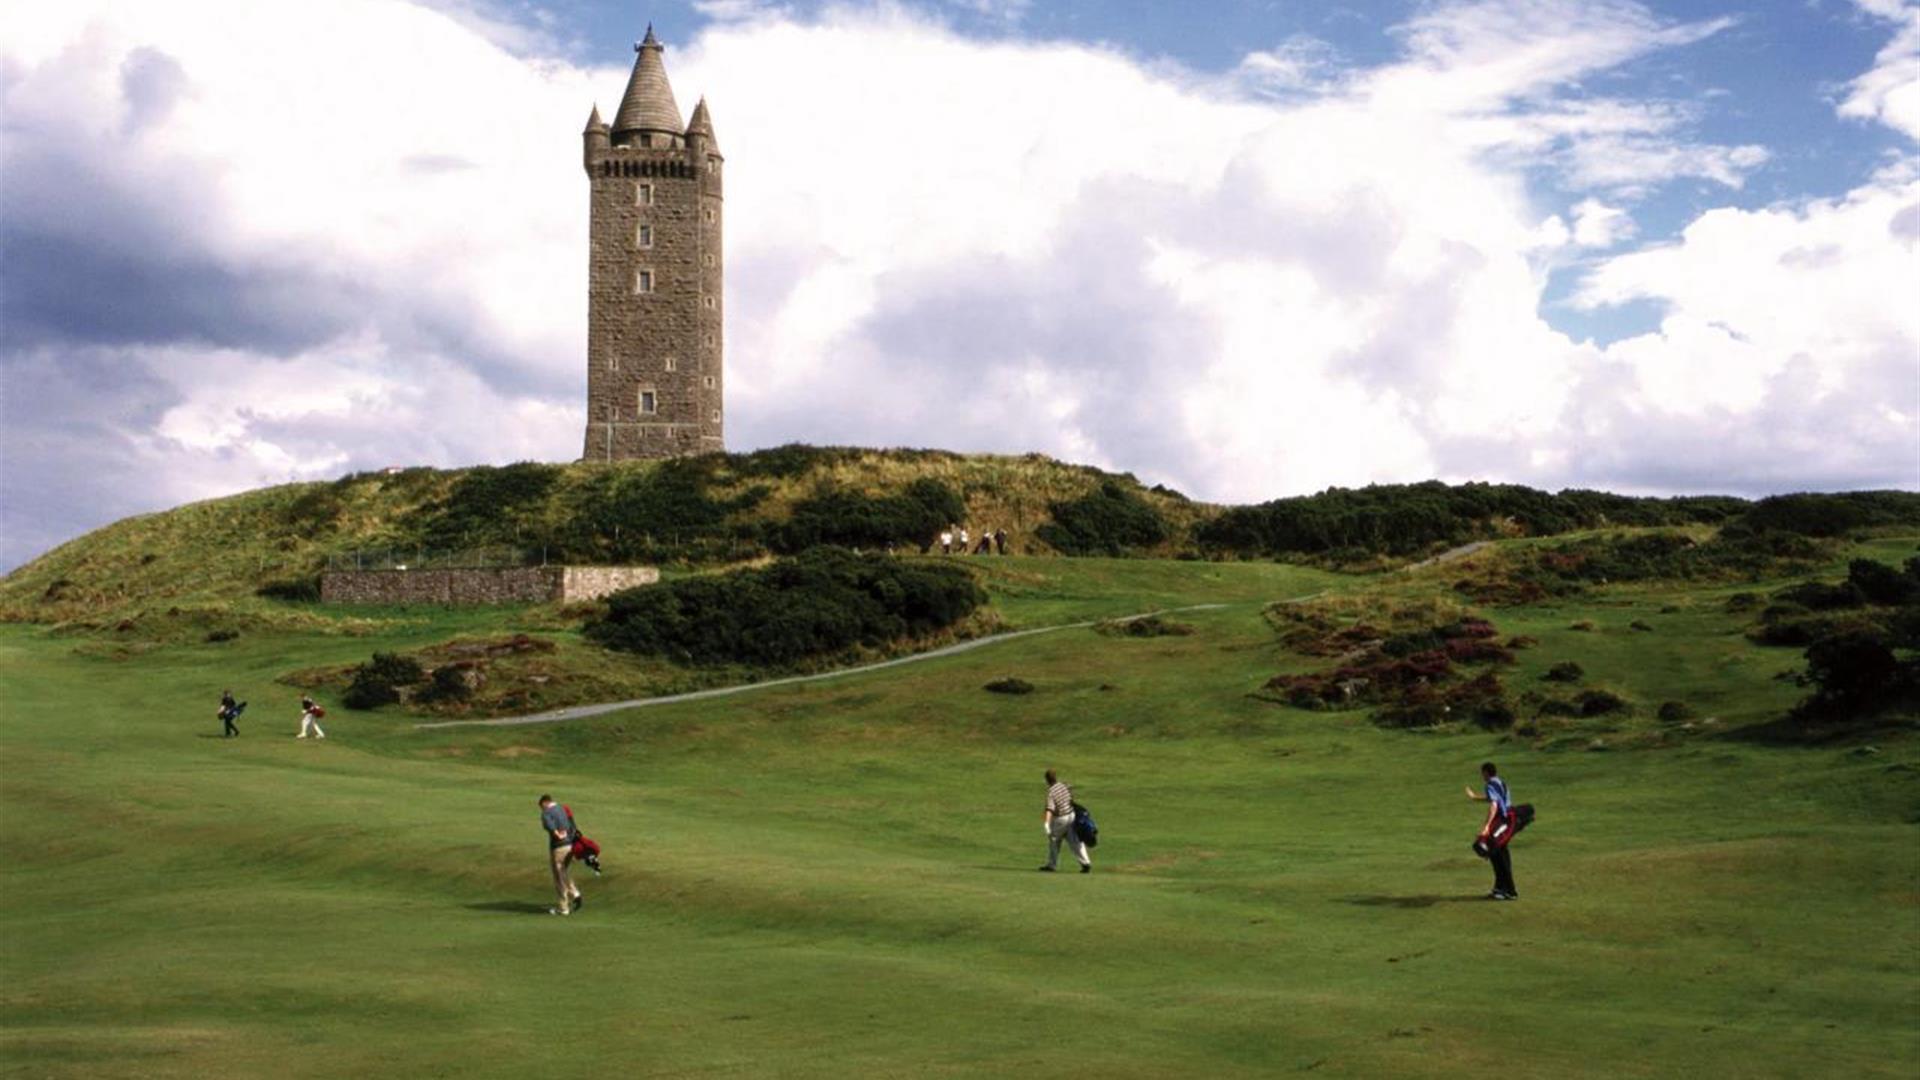 Golfers in play on the green with Scrabo Tower in background close by